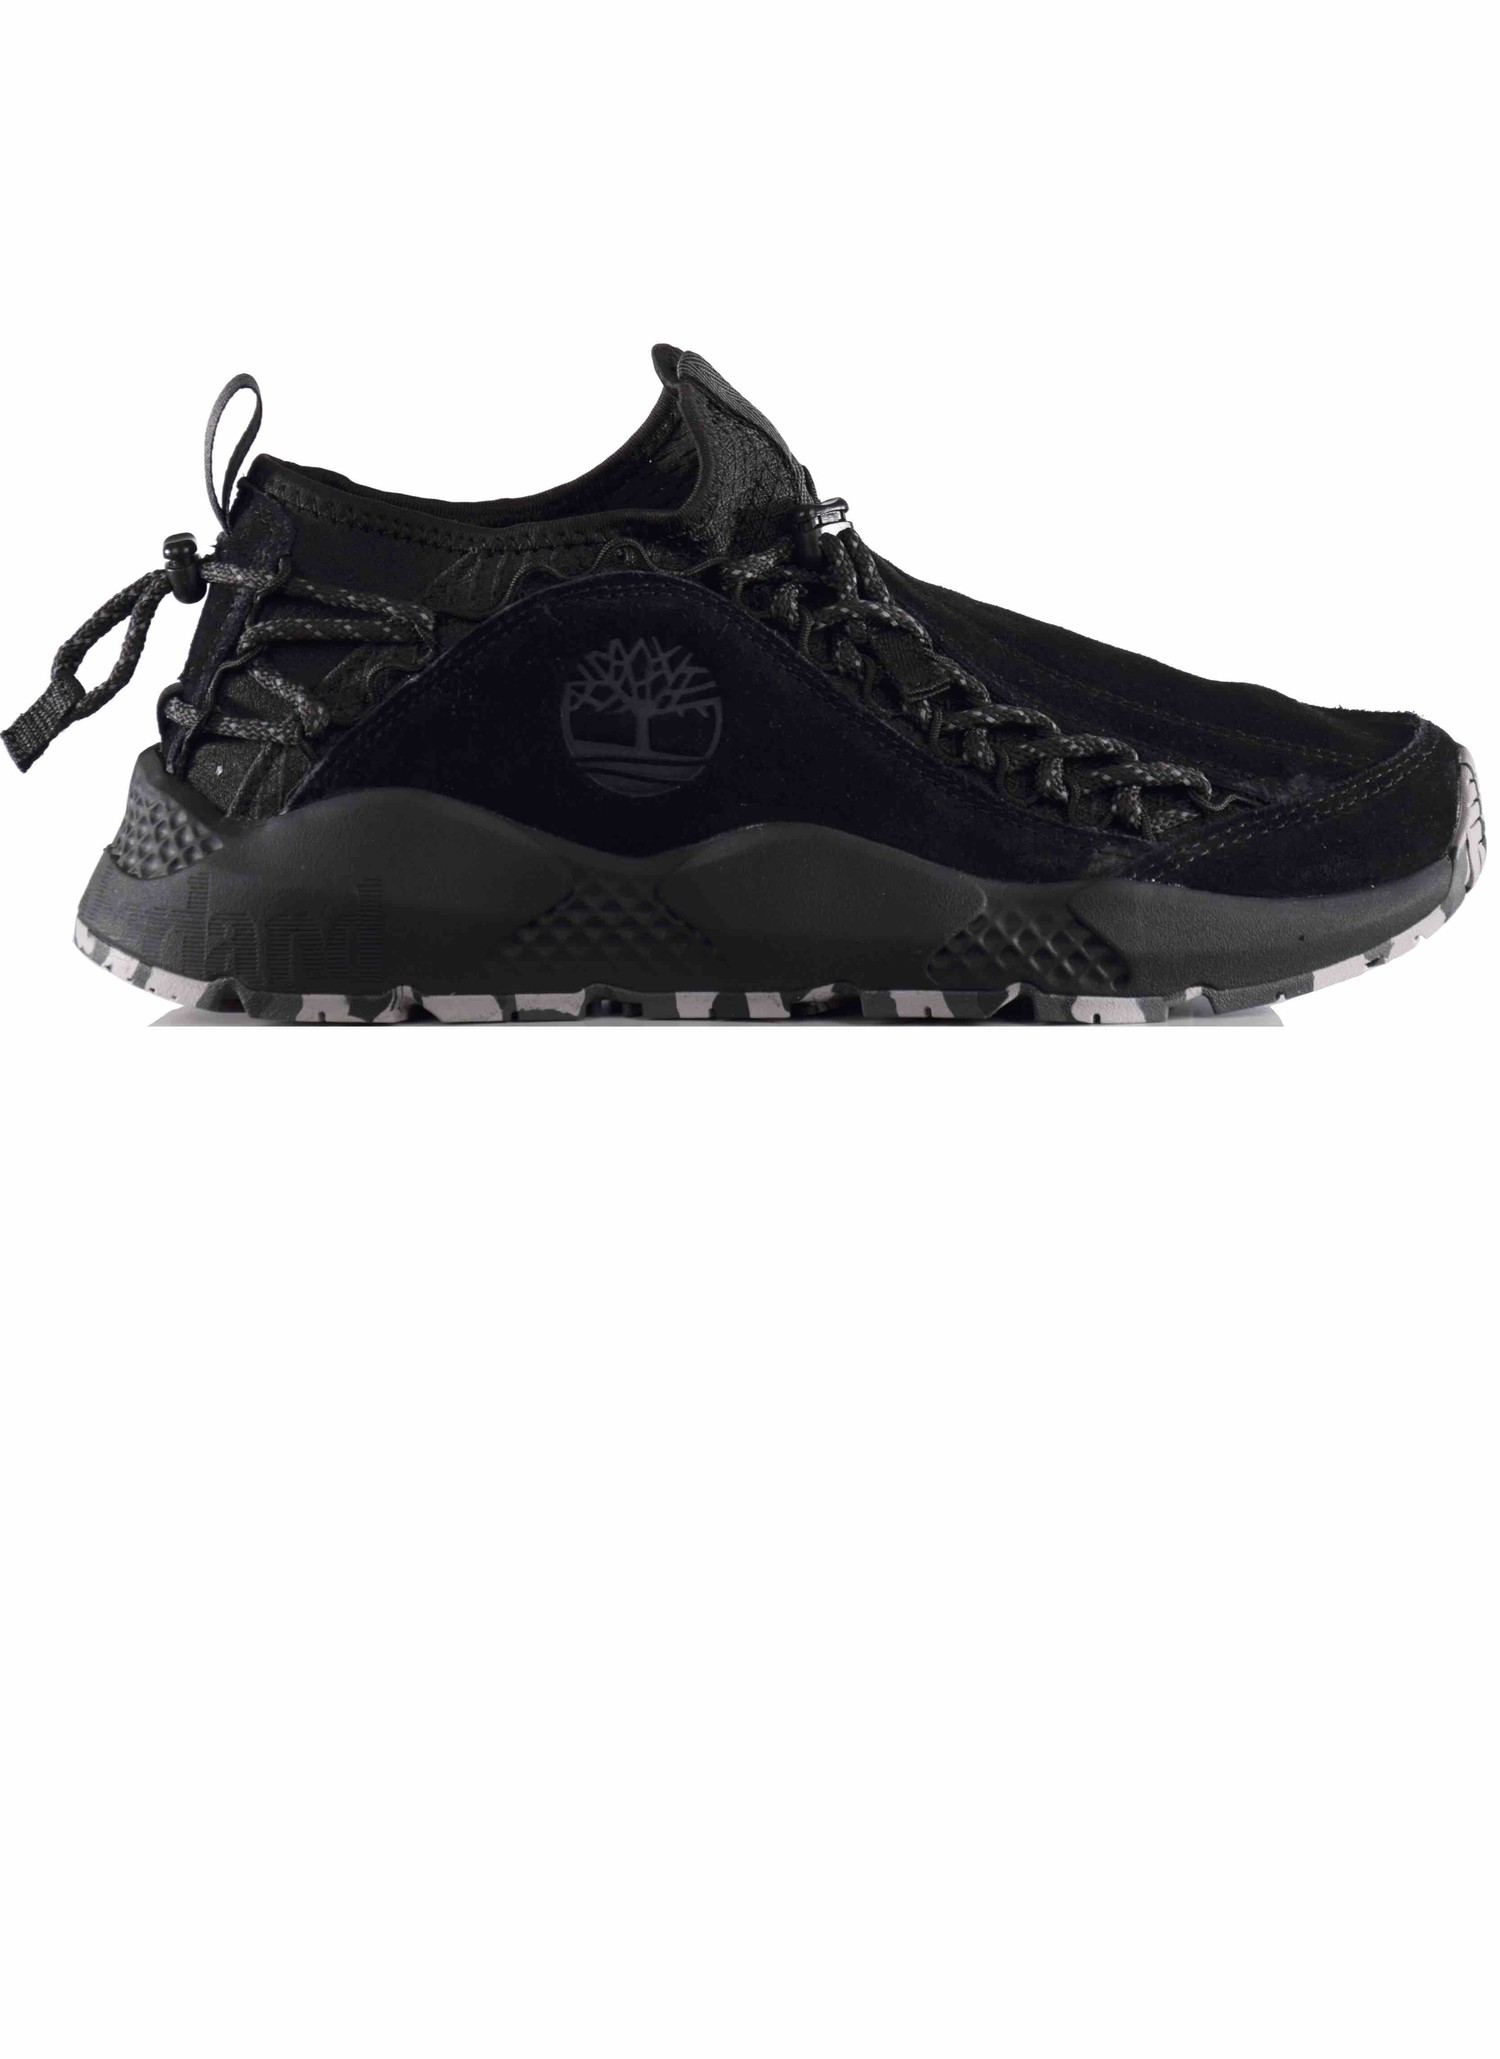 timberland ripcord low